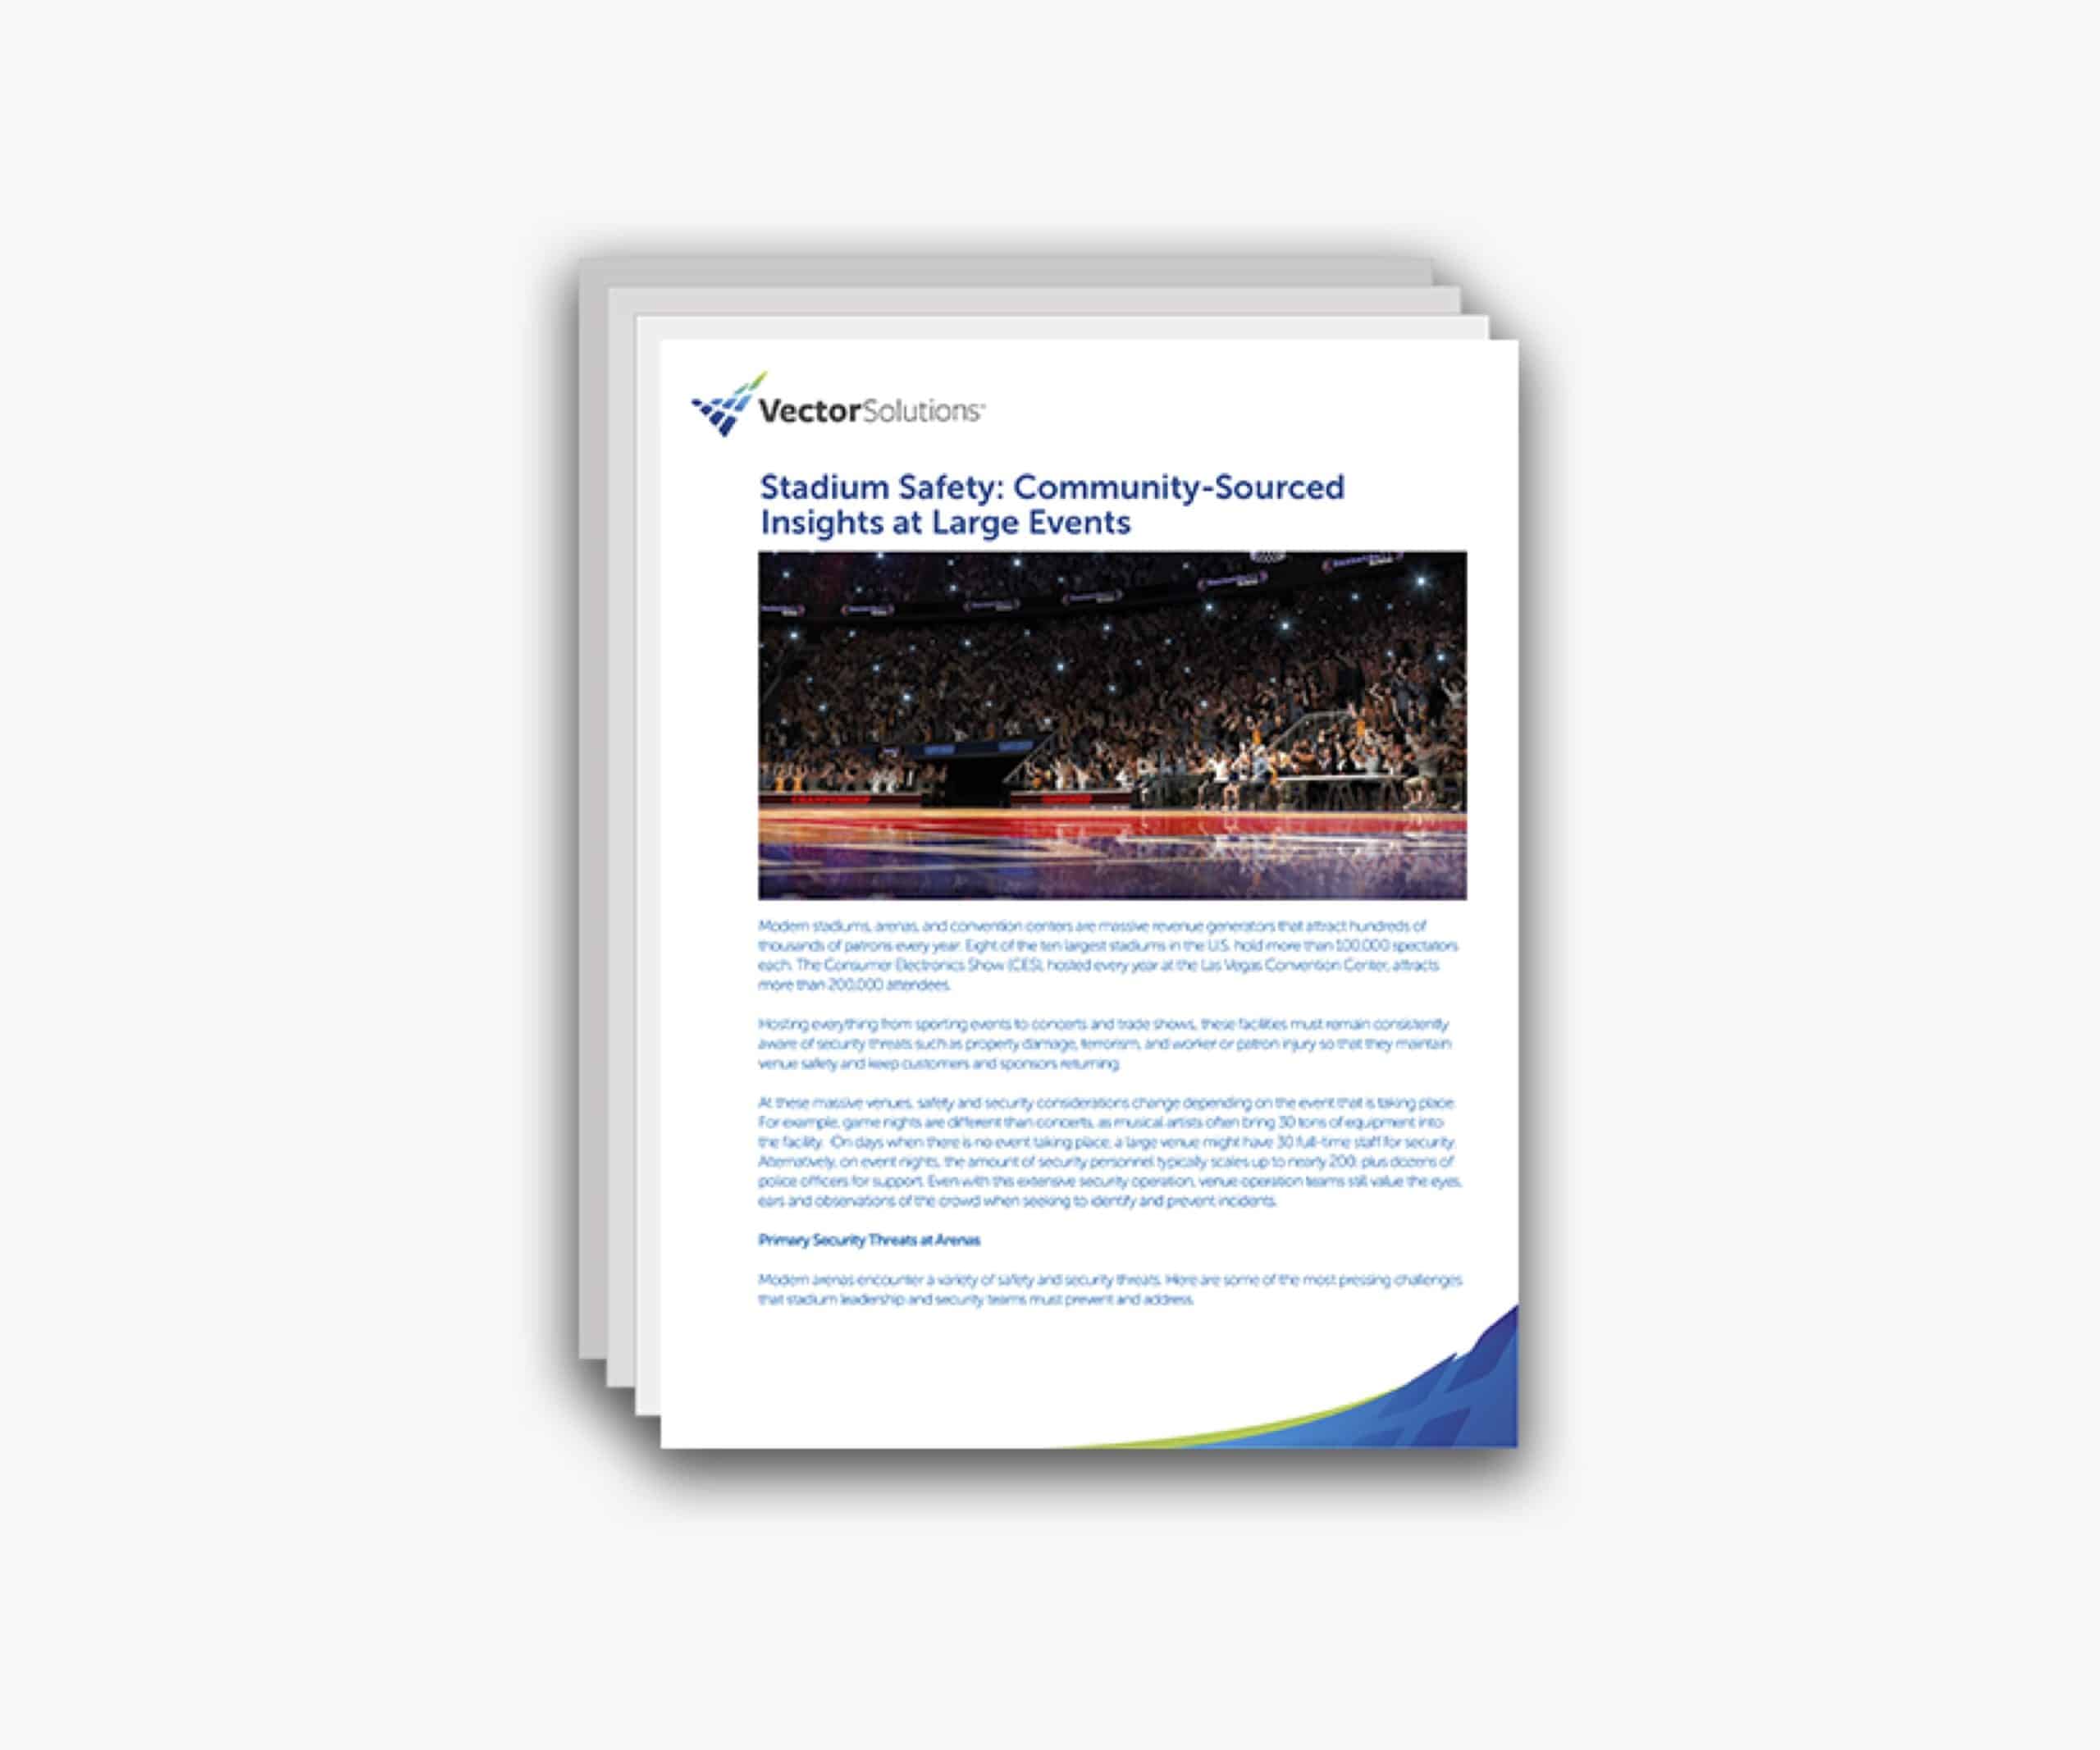 Stadium Safety & Community-Sourced Insights at Large Events - Guide